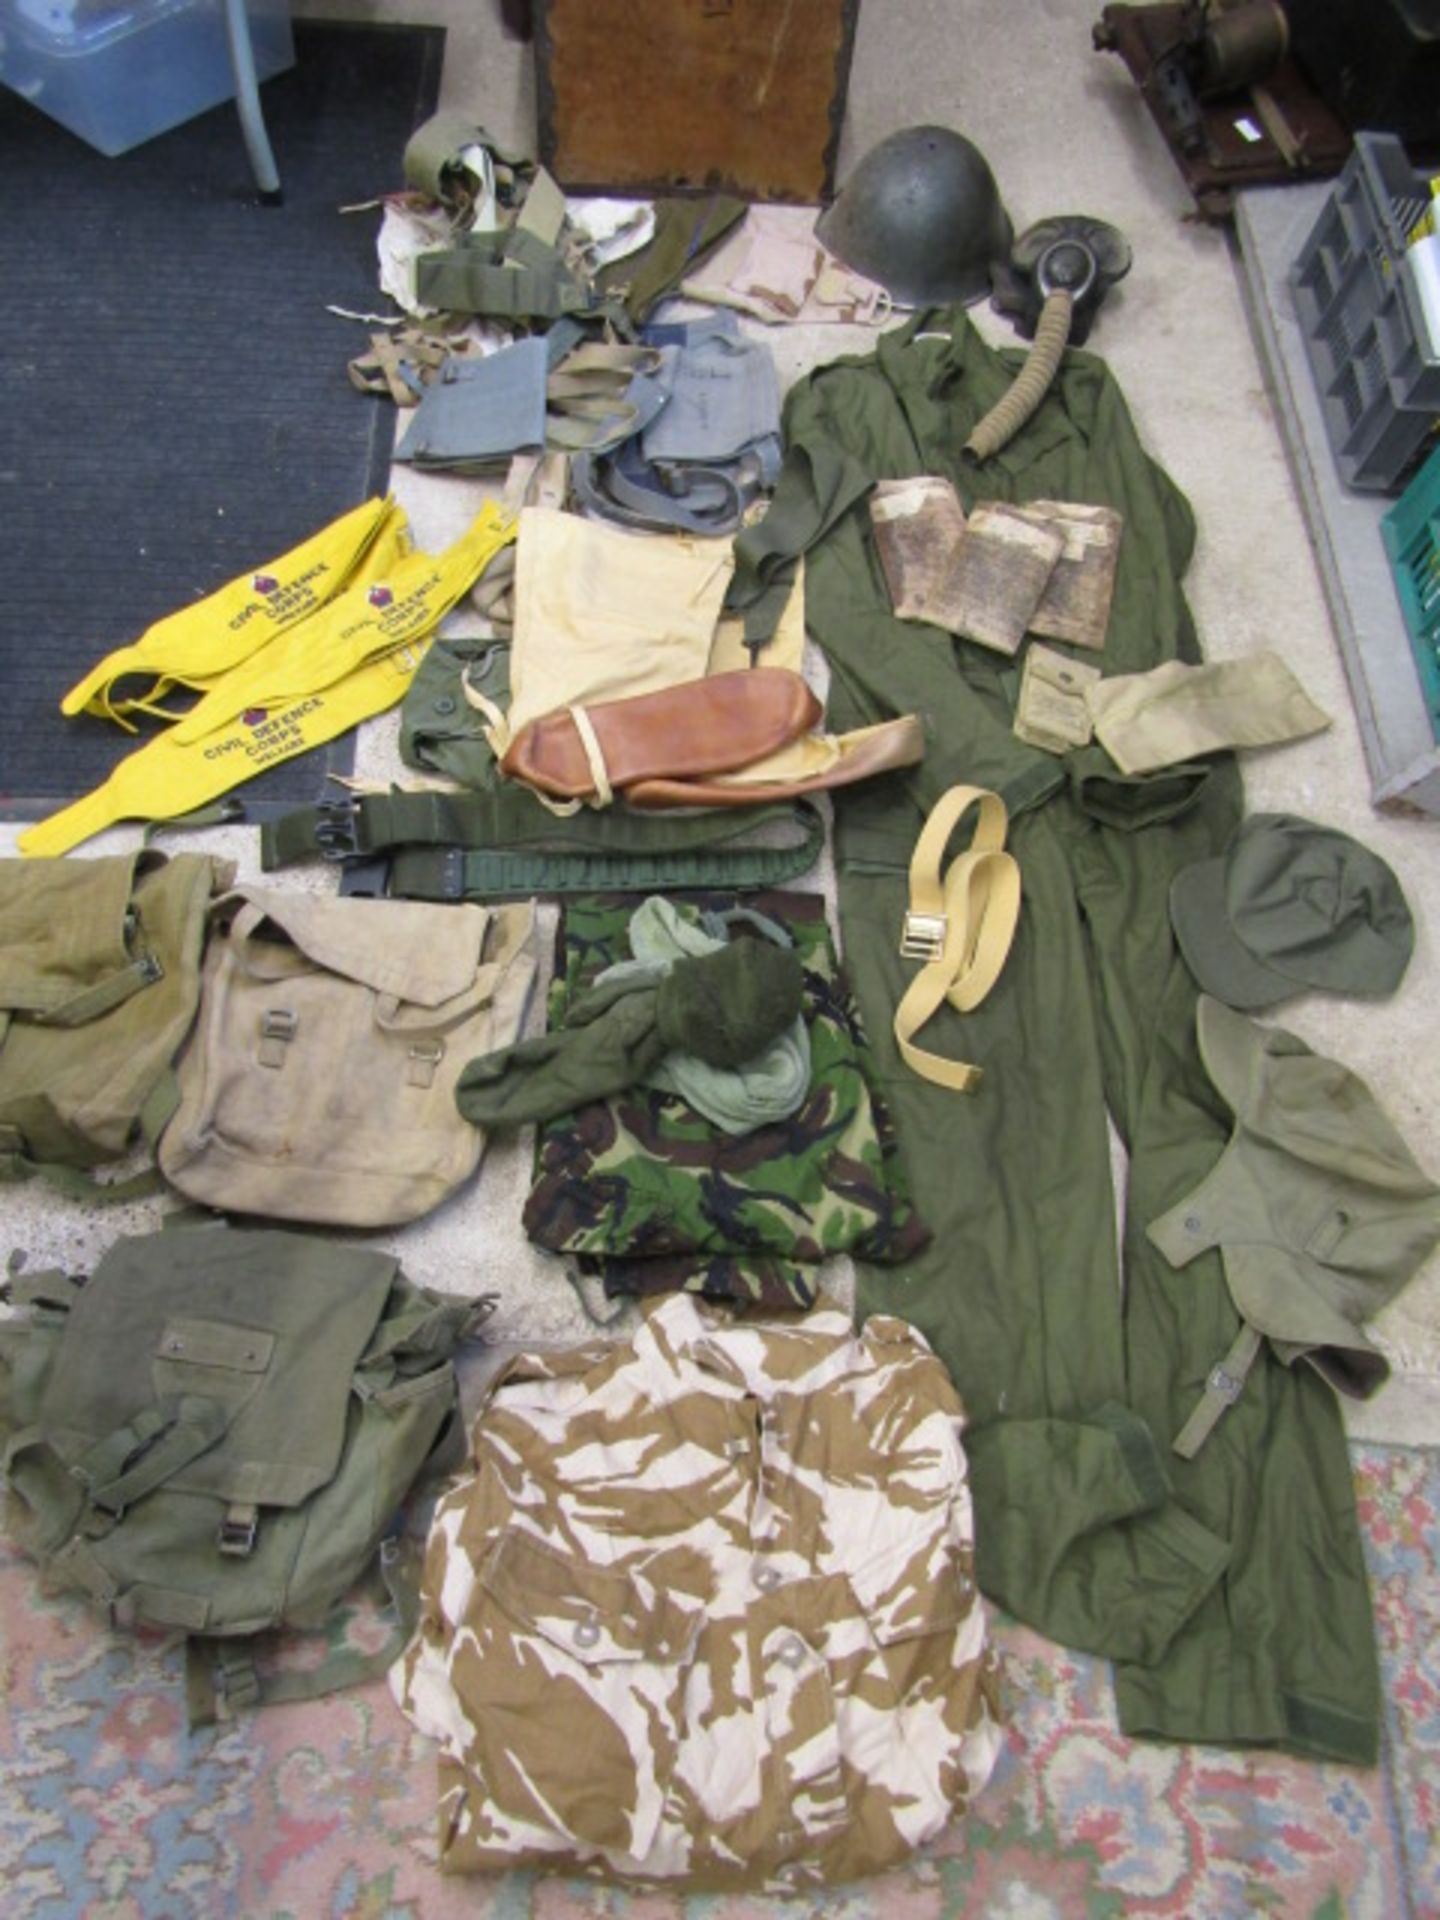 Assorted military/army clothing and accessories